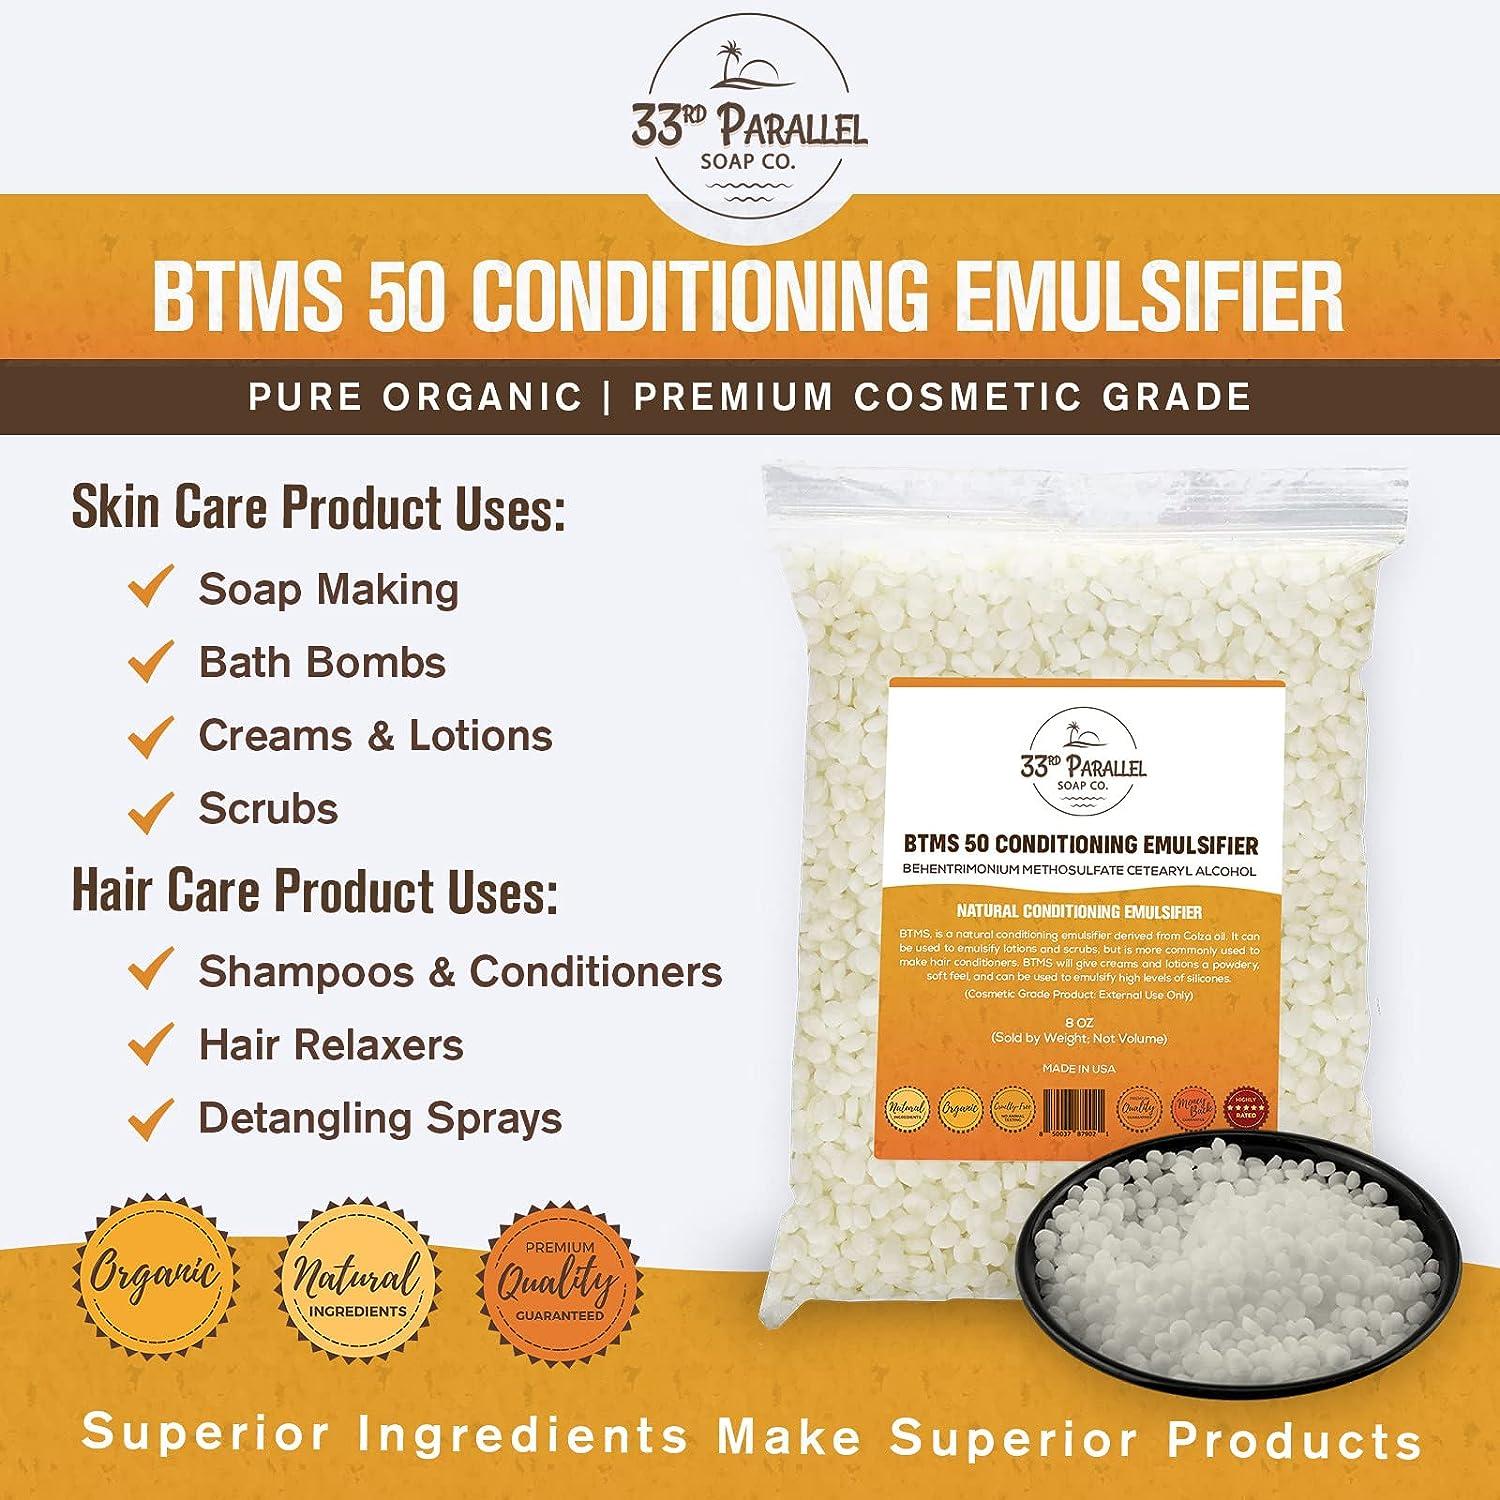 9.6 oz BTMS 50 Conditioning Emulsifier for Making Leave-in Conditioner,  Premium BTMS 50 Conditioning Emulsifier Granules, Higher Activity than BTMS